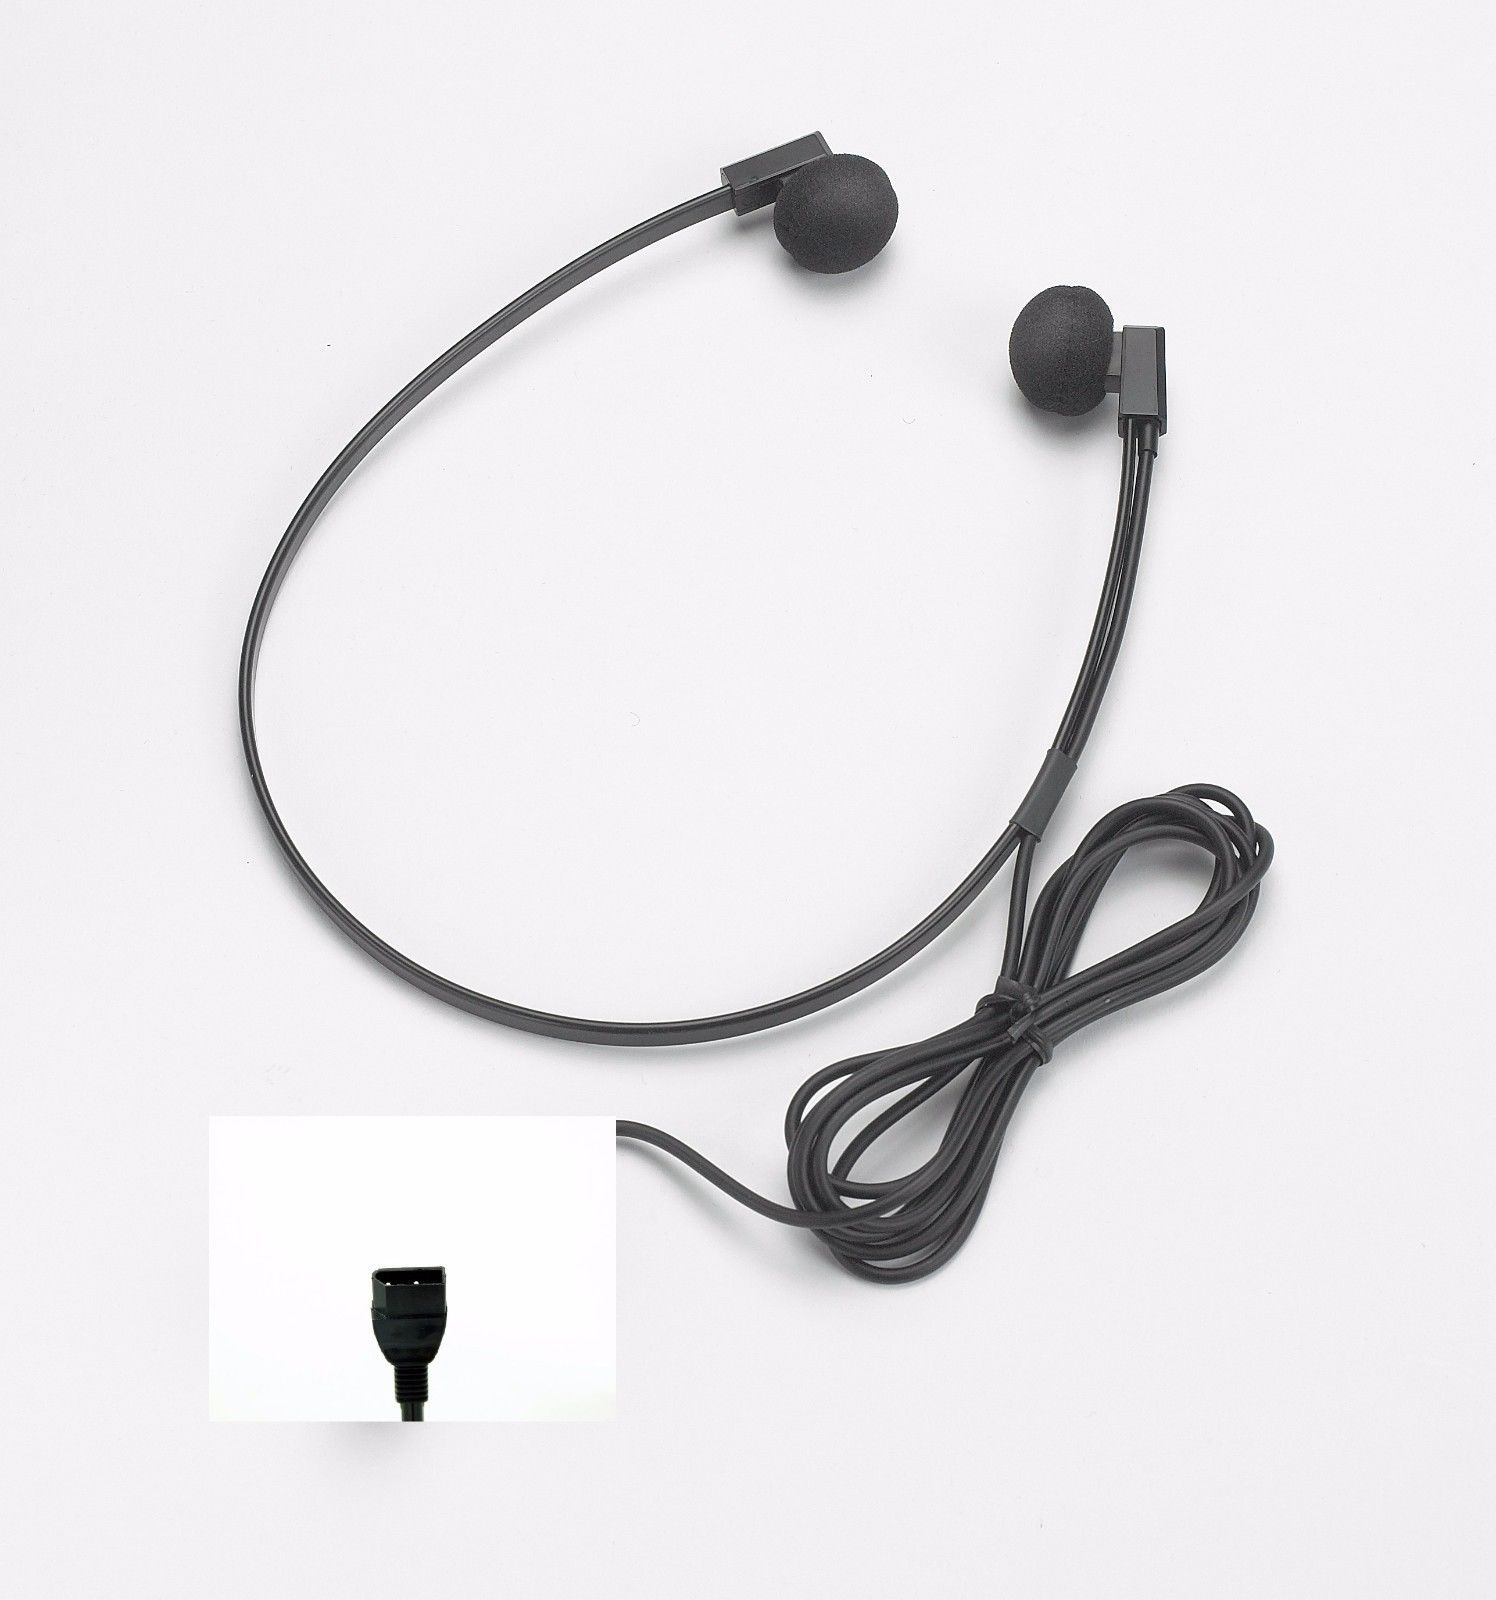 DH-50-N DH50N Underchin Transcription Headset for Philips Norelco Transcriber 